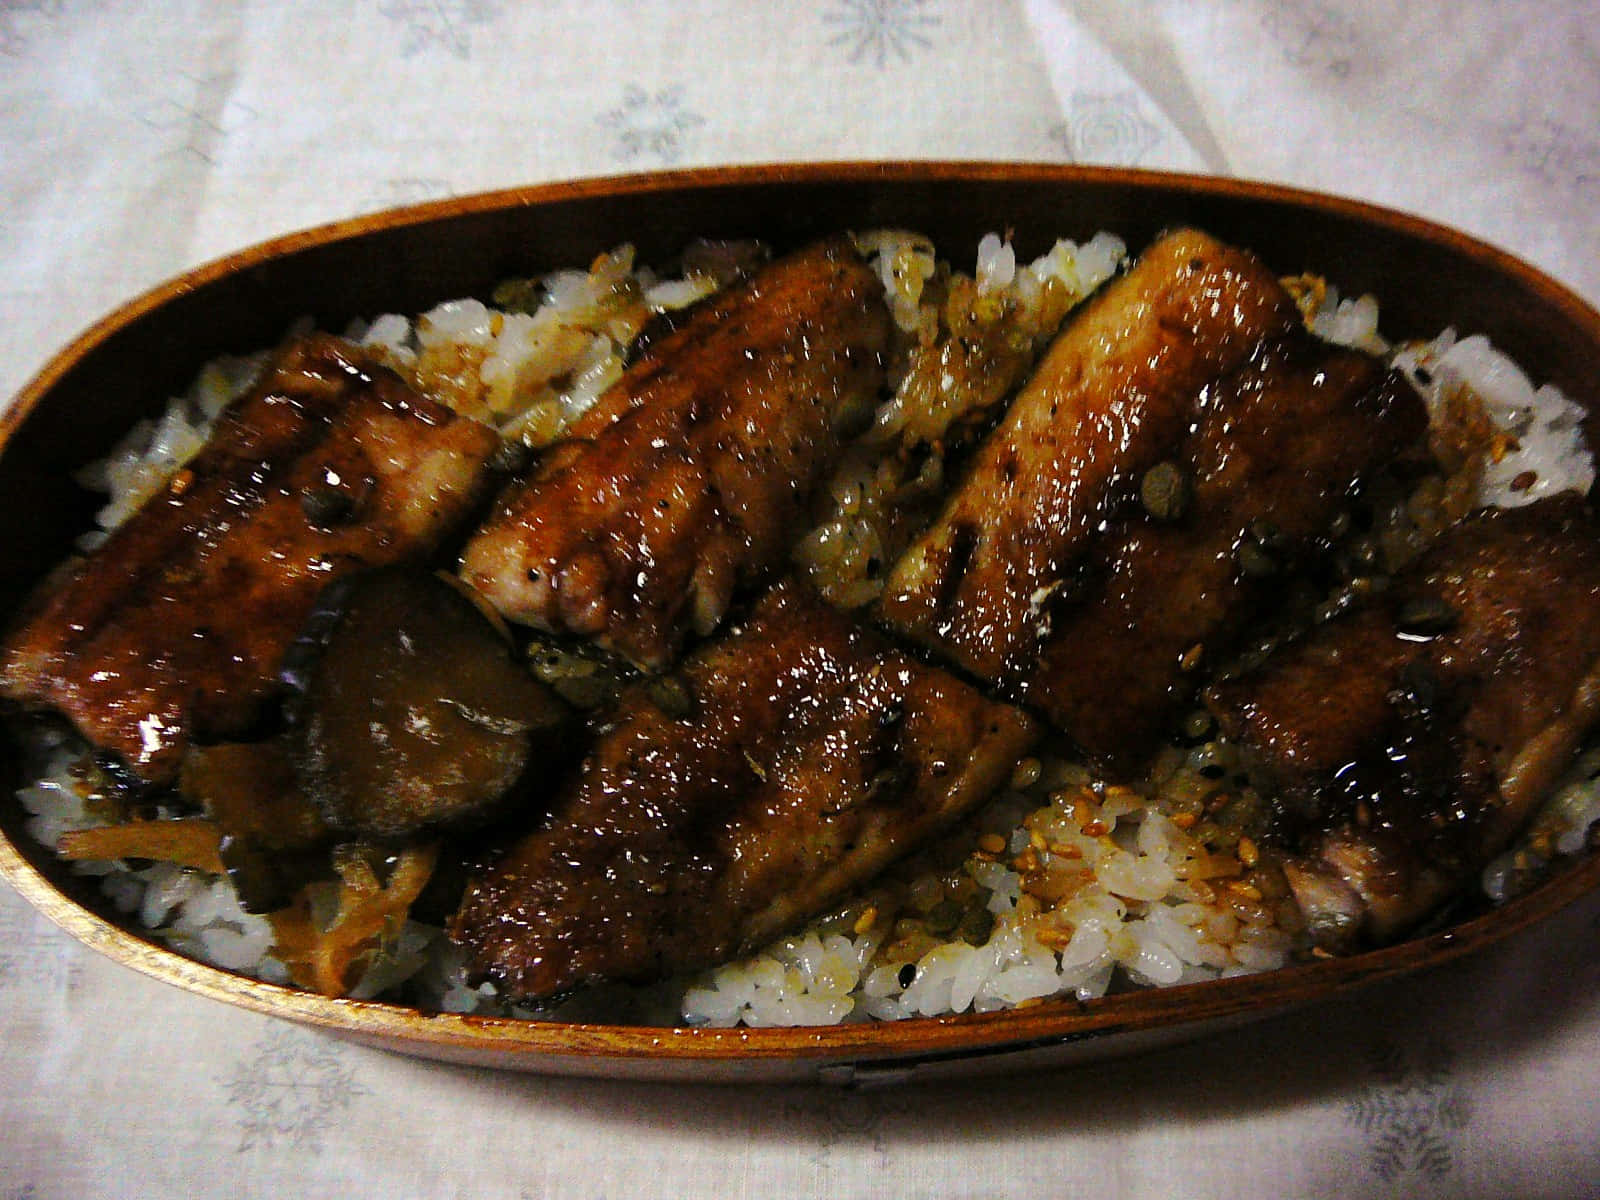 Grilled Saury Over Rice.jpg Wallpaper